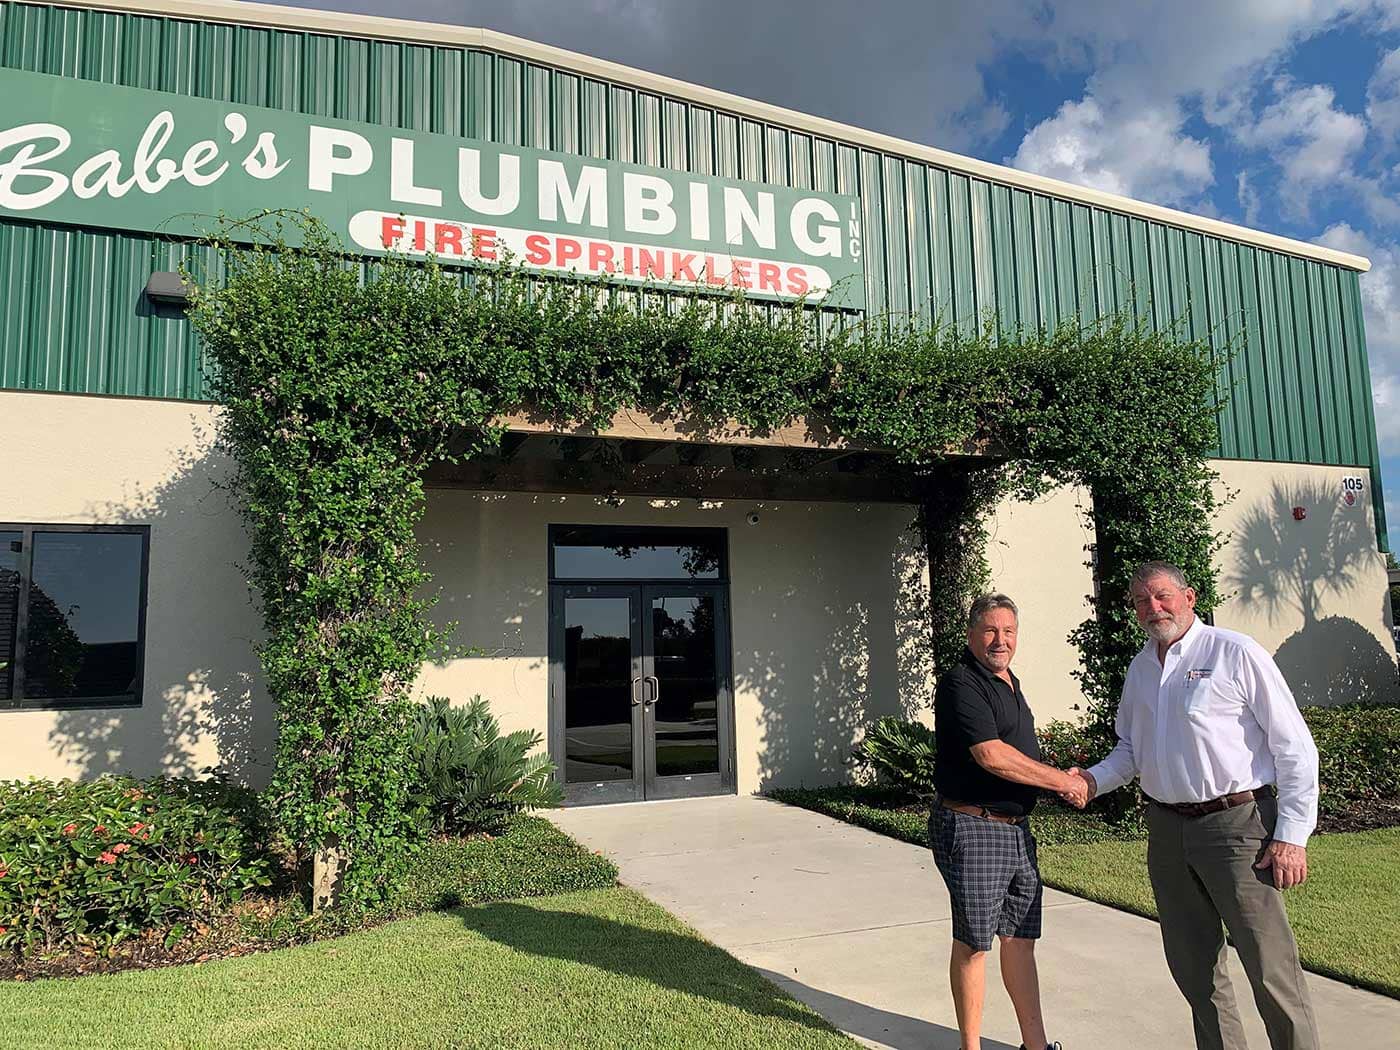 Two men shaking hands in front of a building with signage that reads "Babe’s Plumbing Fire Sprinklers.